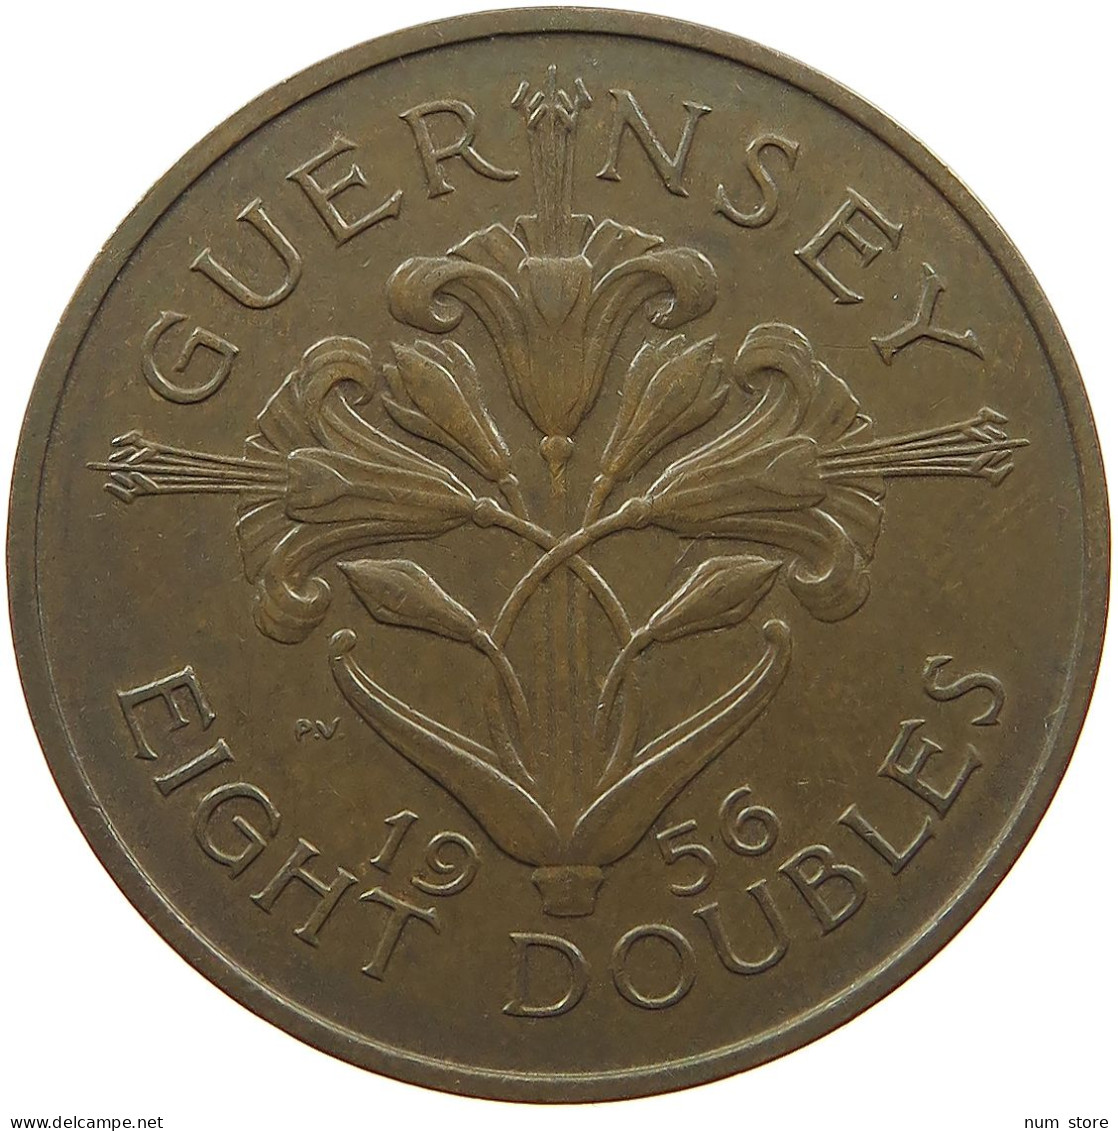 GUERNSEY 8 DOUBLES 1956 Elizabeth II. (1952-2022) #a039 0559 - Guernesey